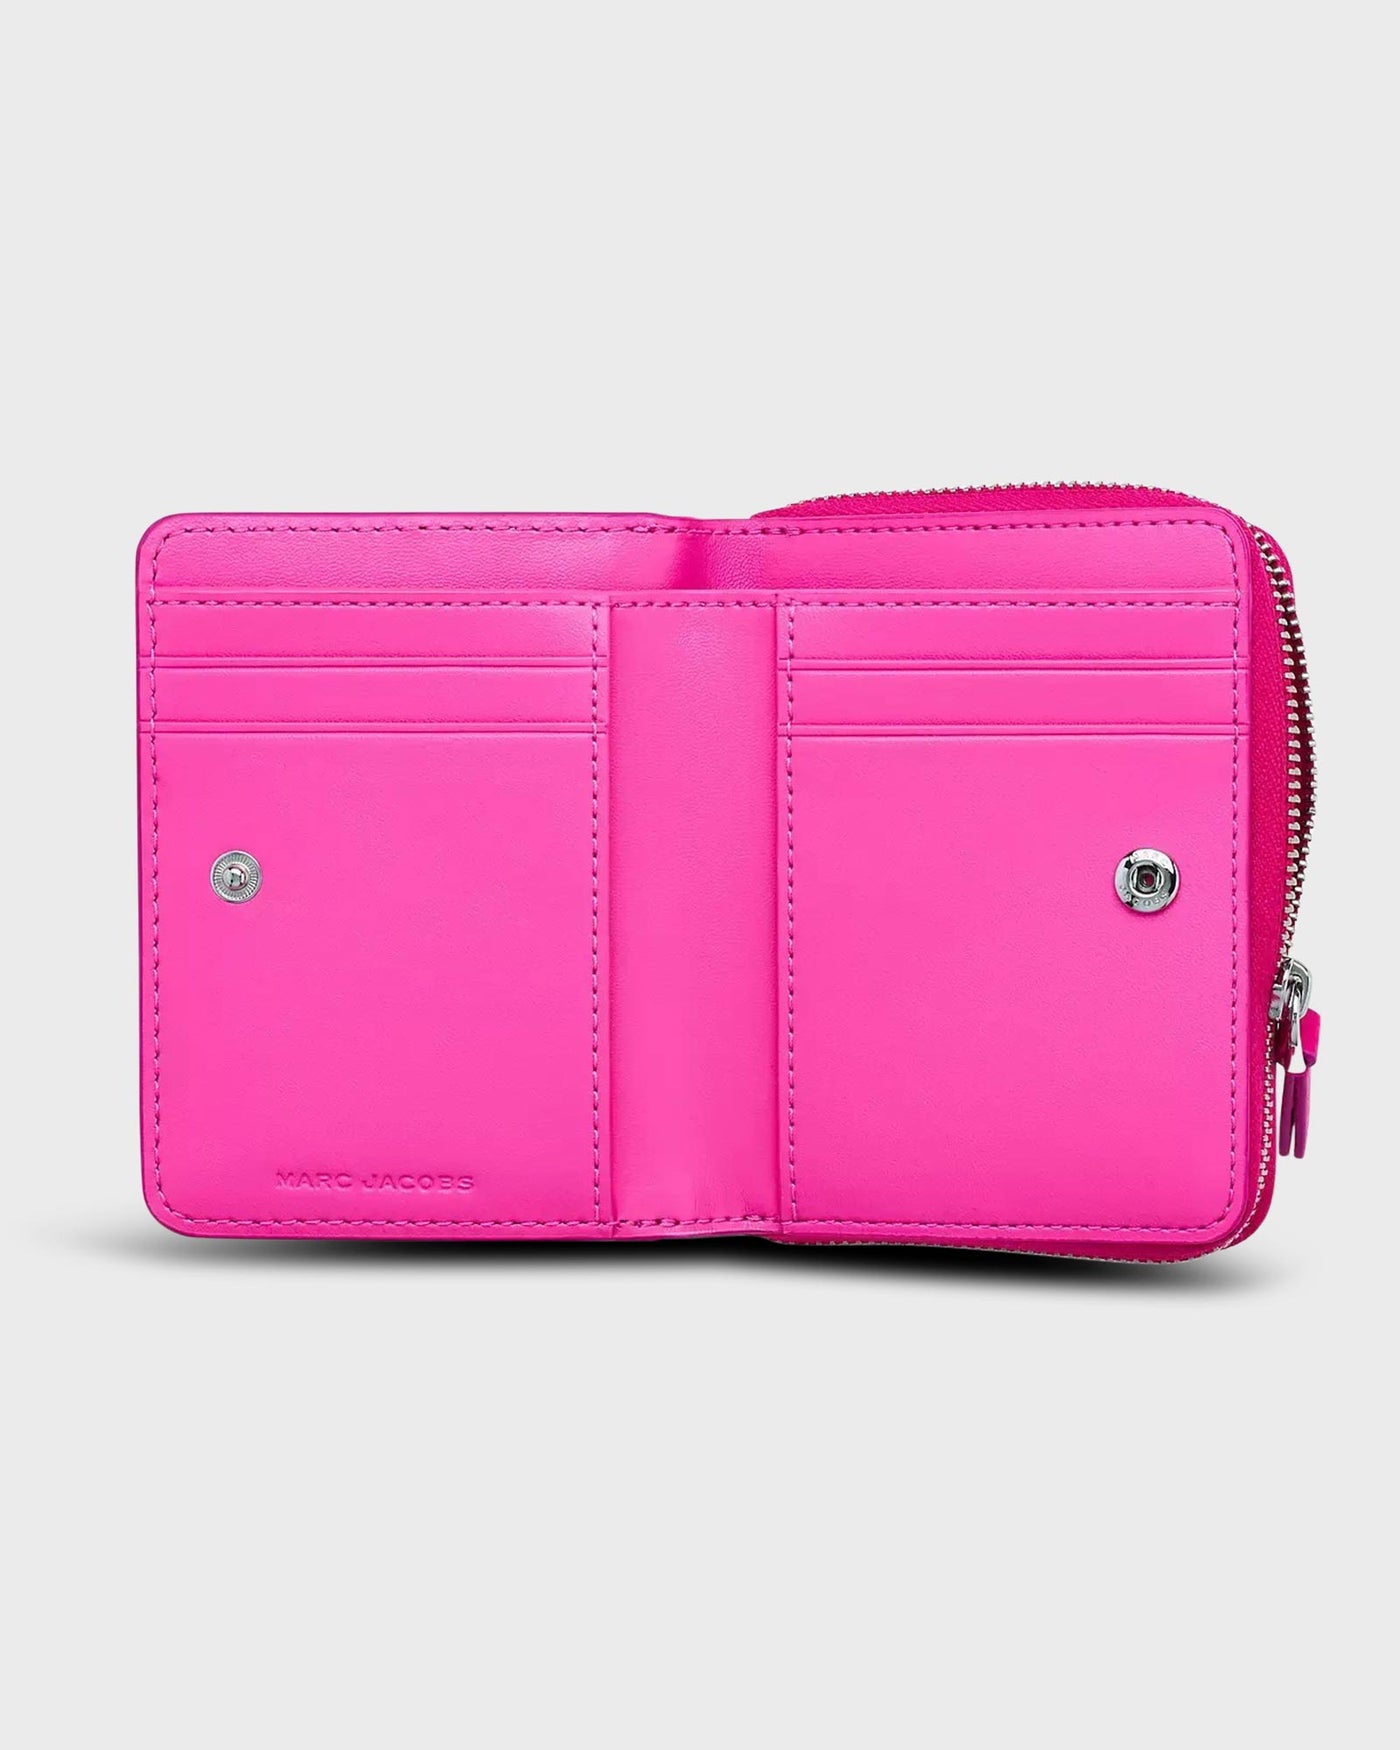 Marc Jacobs Geldbeutel The Leather Mini Compact Wallet Hot Pink myMEID